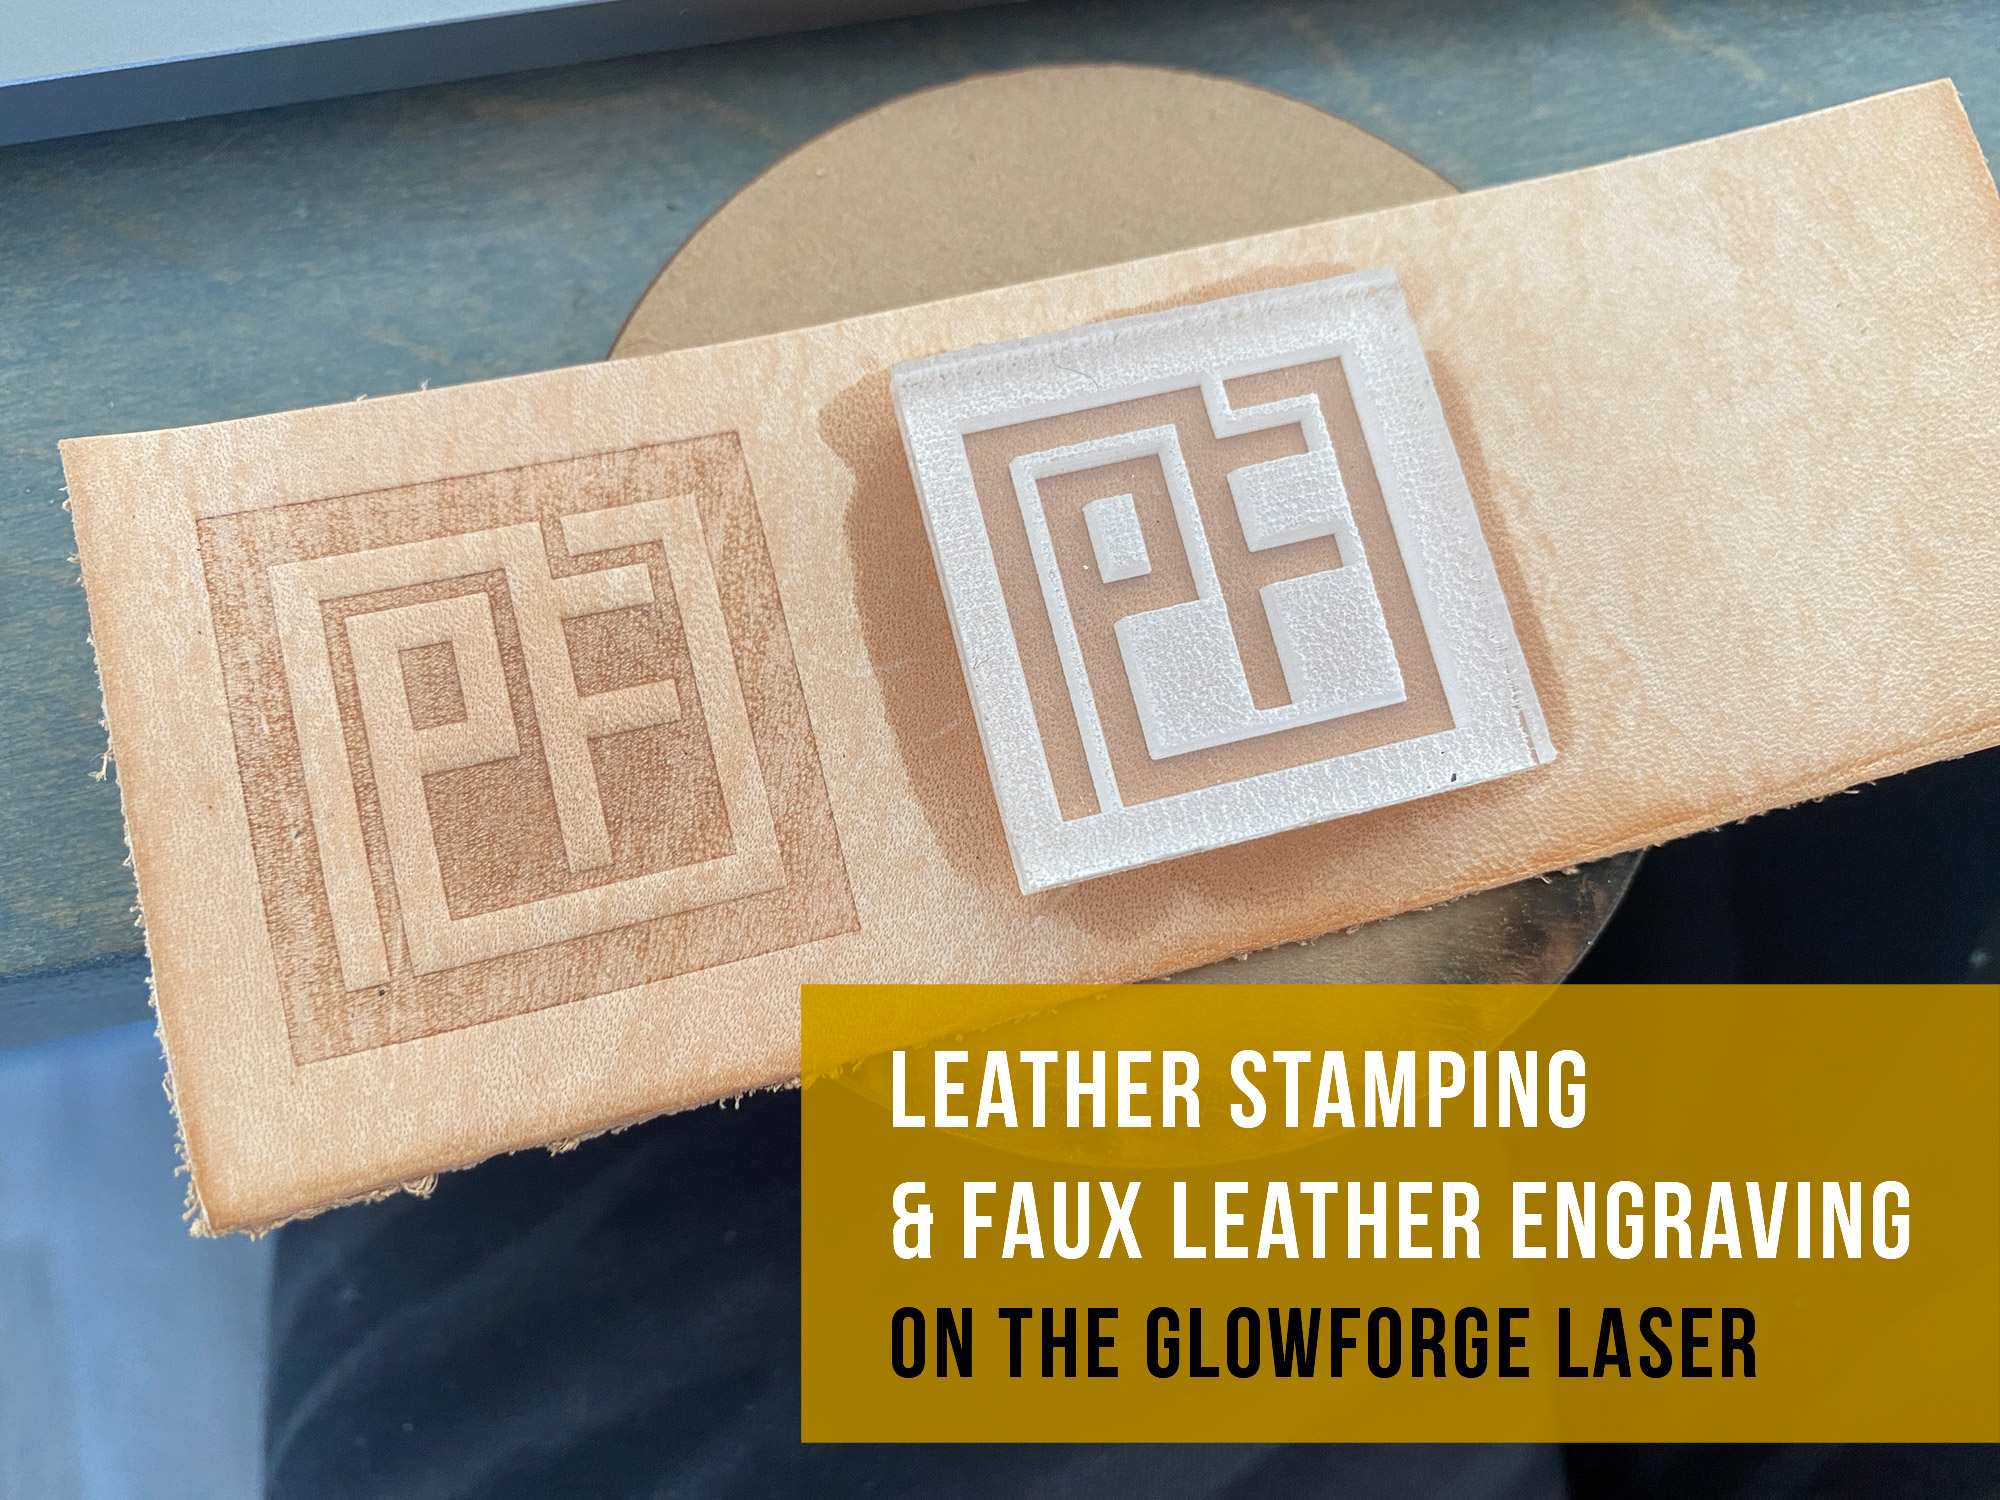 How Much for a Decent Leather Laser Engraver?